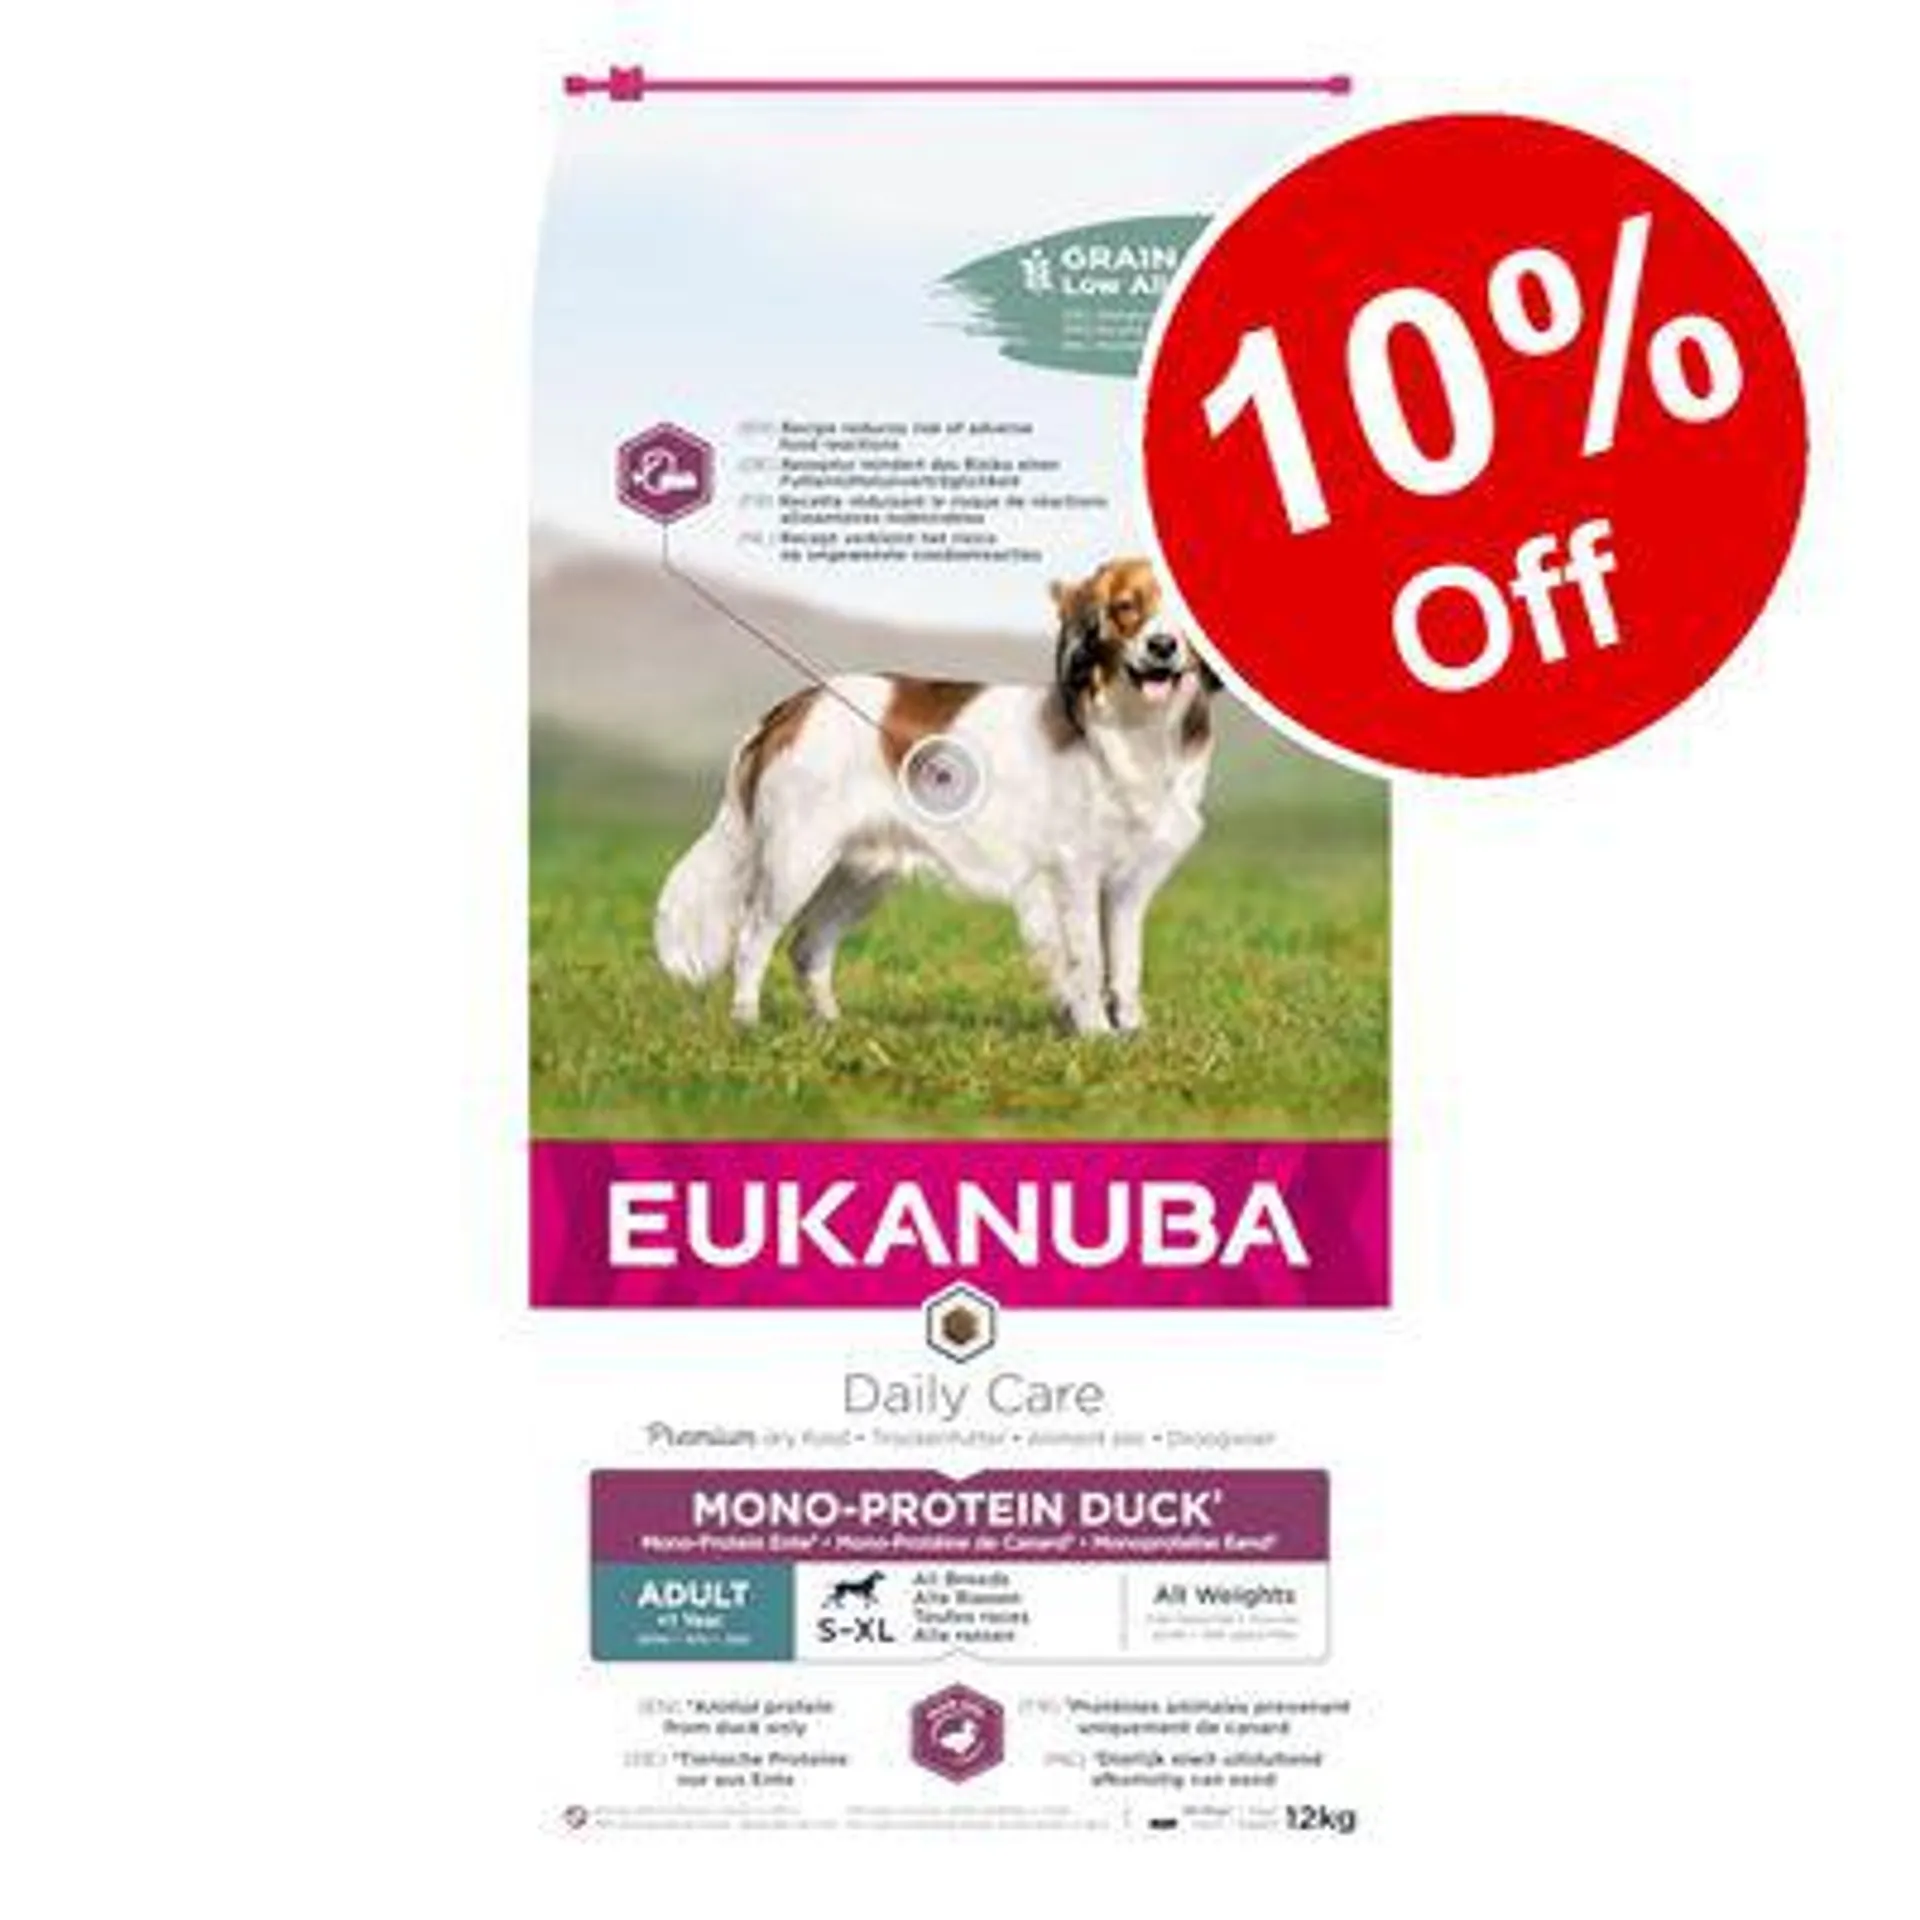 12kg Eukanuba Daily Care Adult Mono-Protein Dry Dog Food - 10% Off! *